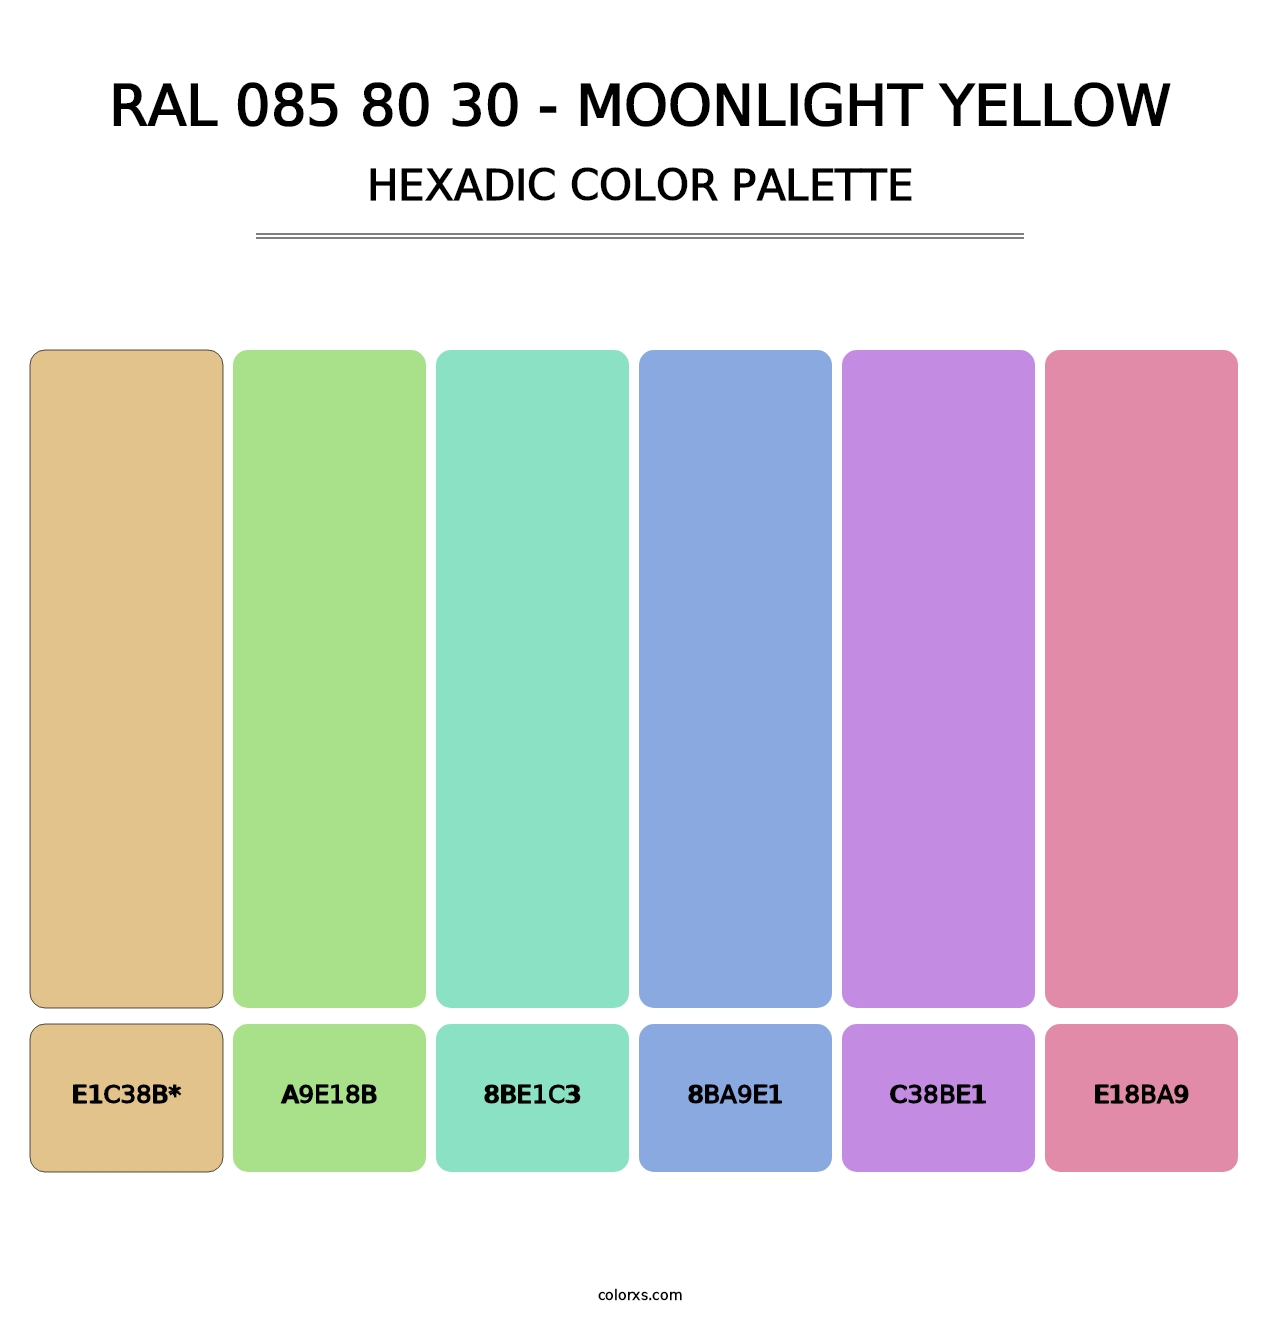 RAL 085 80 30 - Moonlight Yellow - Hexadic Color Palette